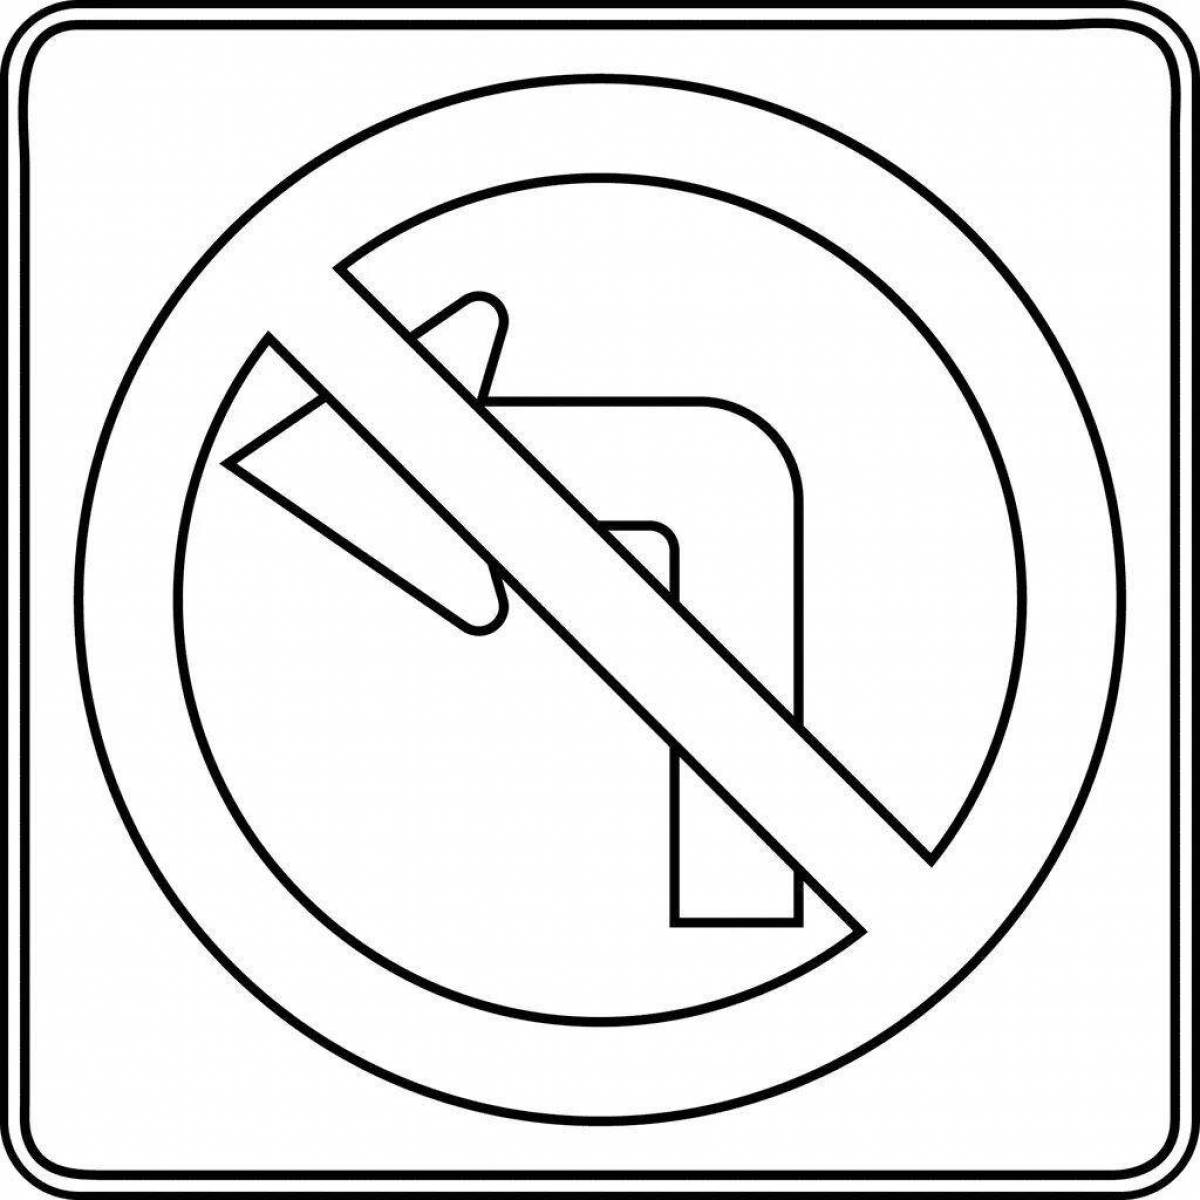 Live no traffic signs coloring page